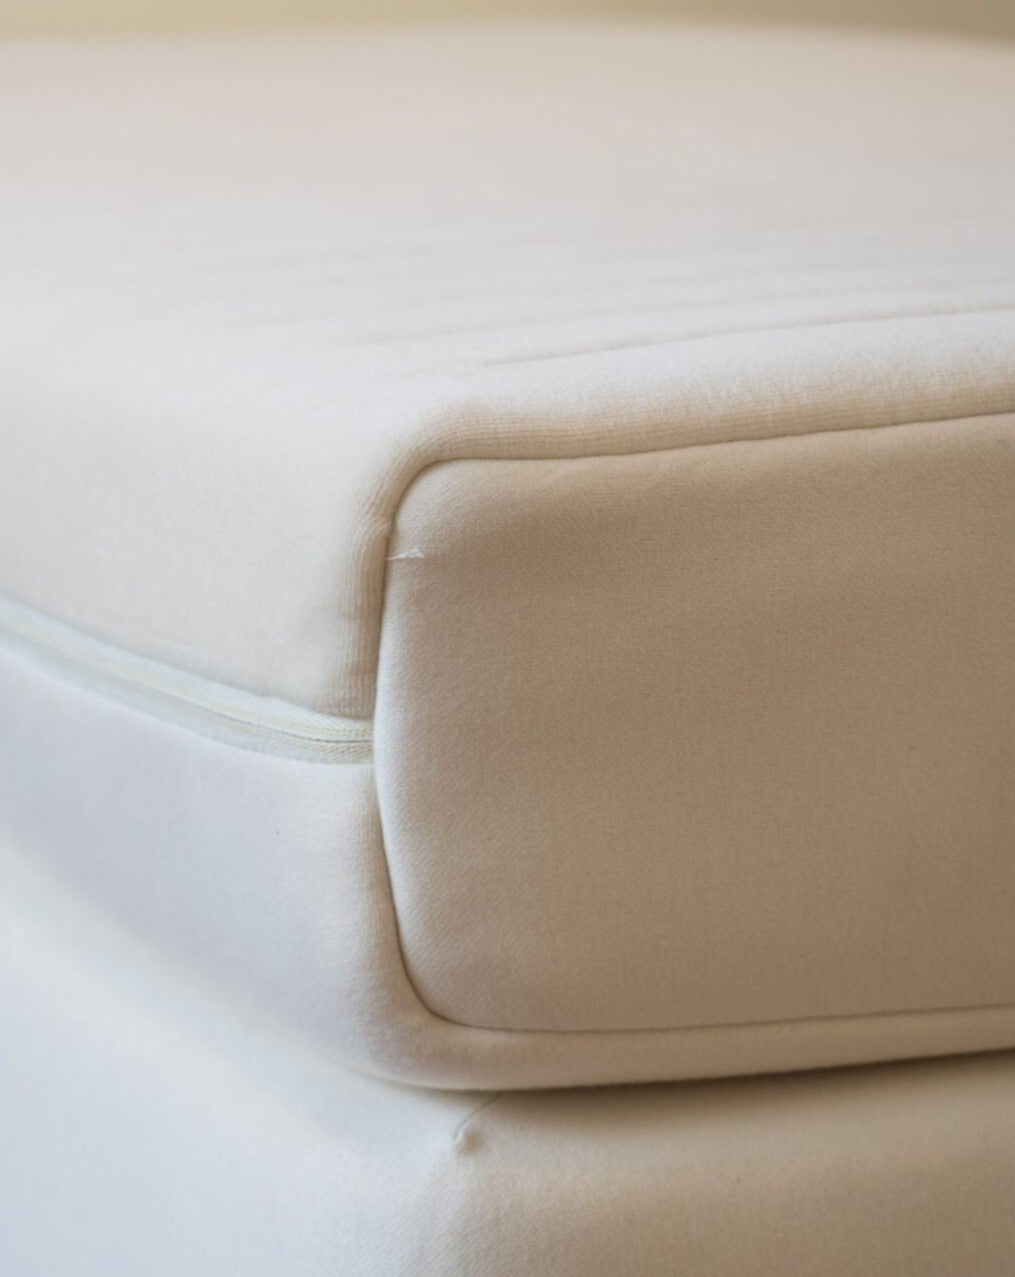 Premium Organic Latex Mattresses for Children and Lightweight Adults at Resthouse Sleep Solutions